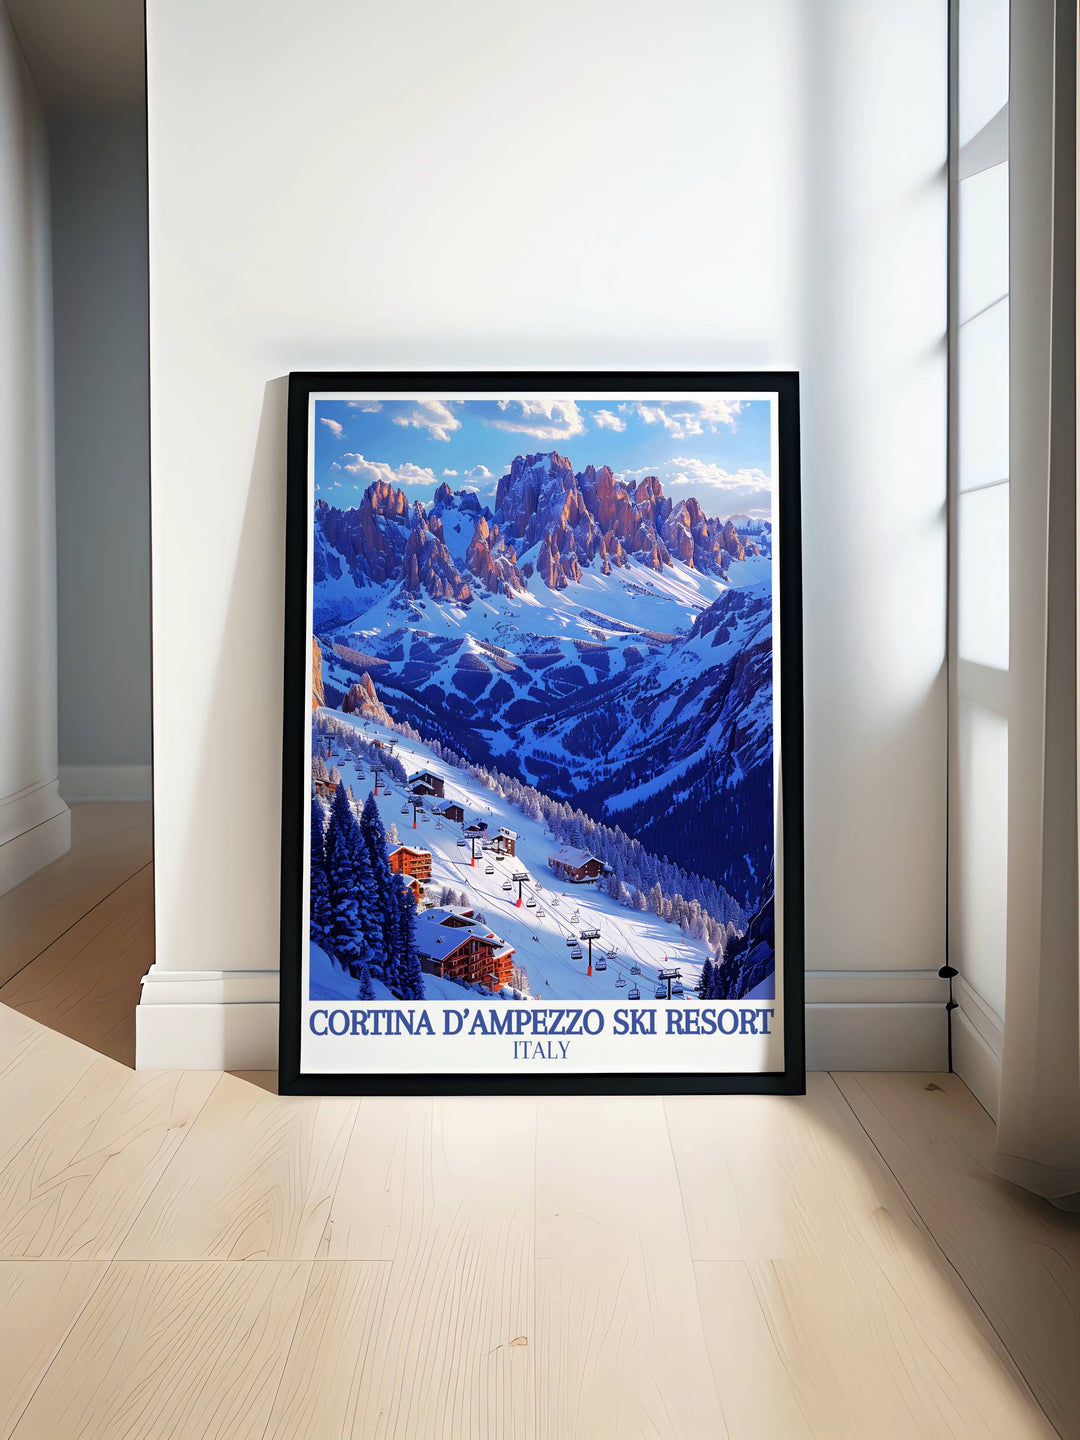 Serene dusk on the ski slopes of Tofana with skiers finishing their day, depicted in a peaceful and picturesque print